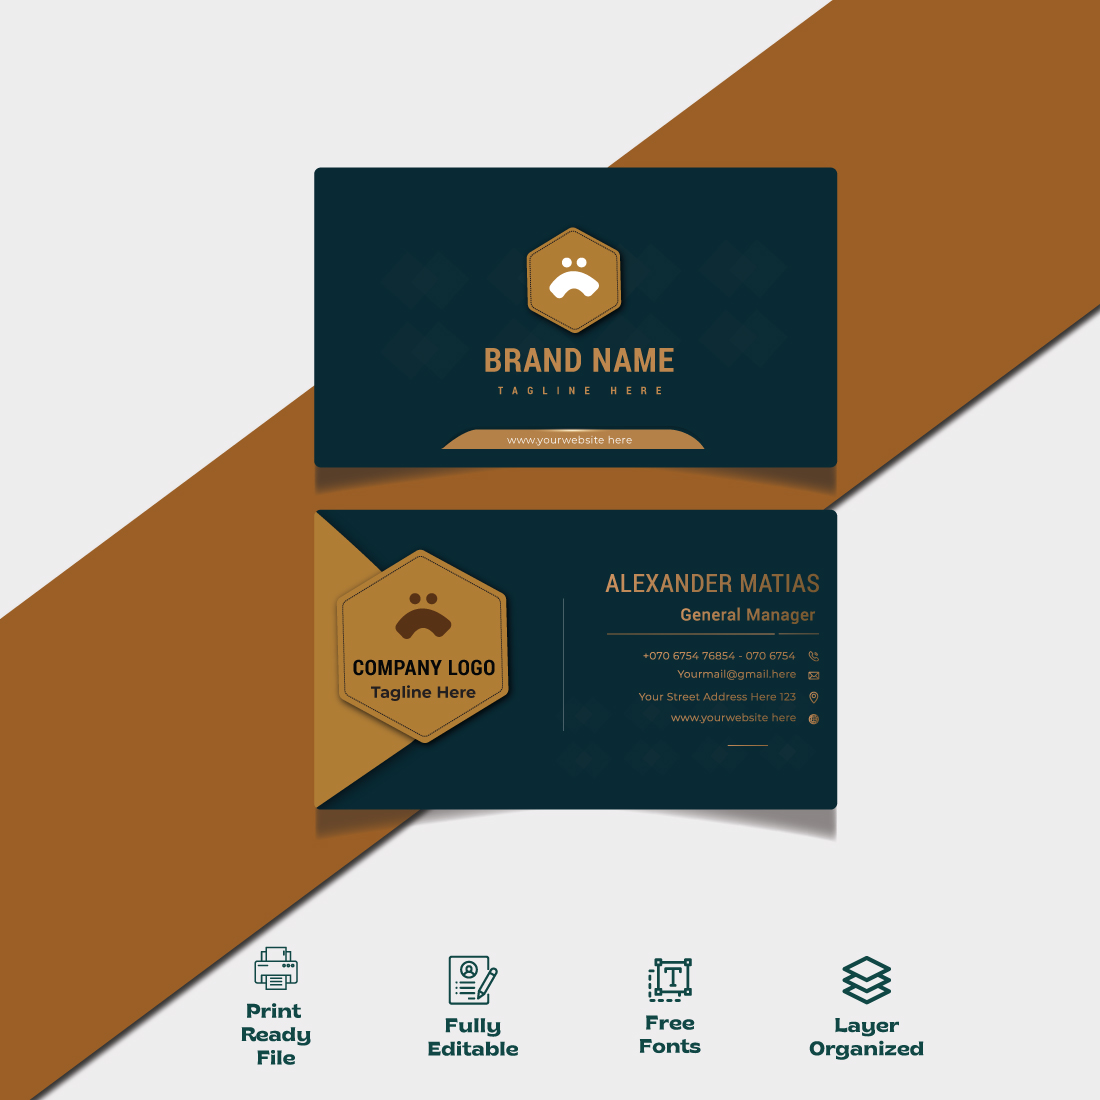 Creative and clean business card template layout Vector illustration Stationery design cover image.